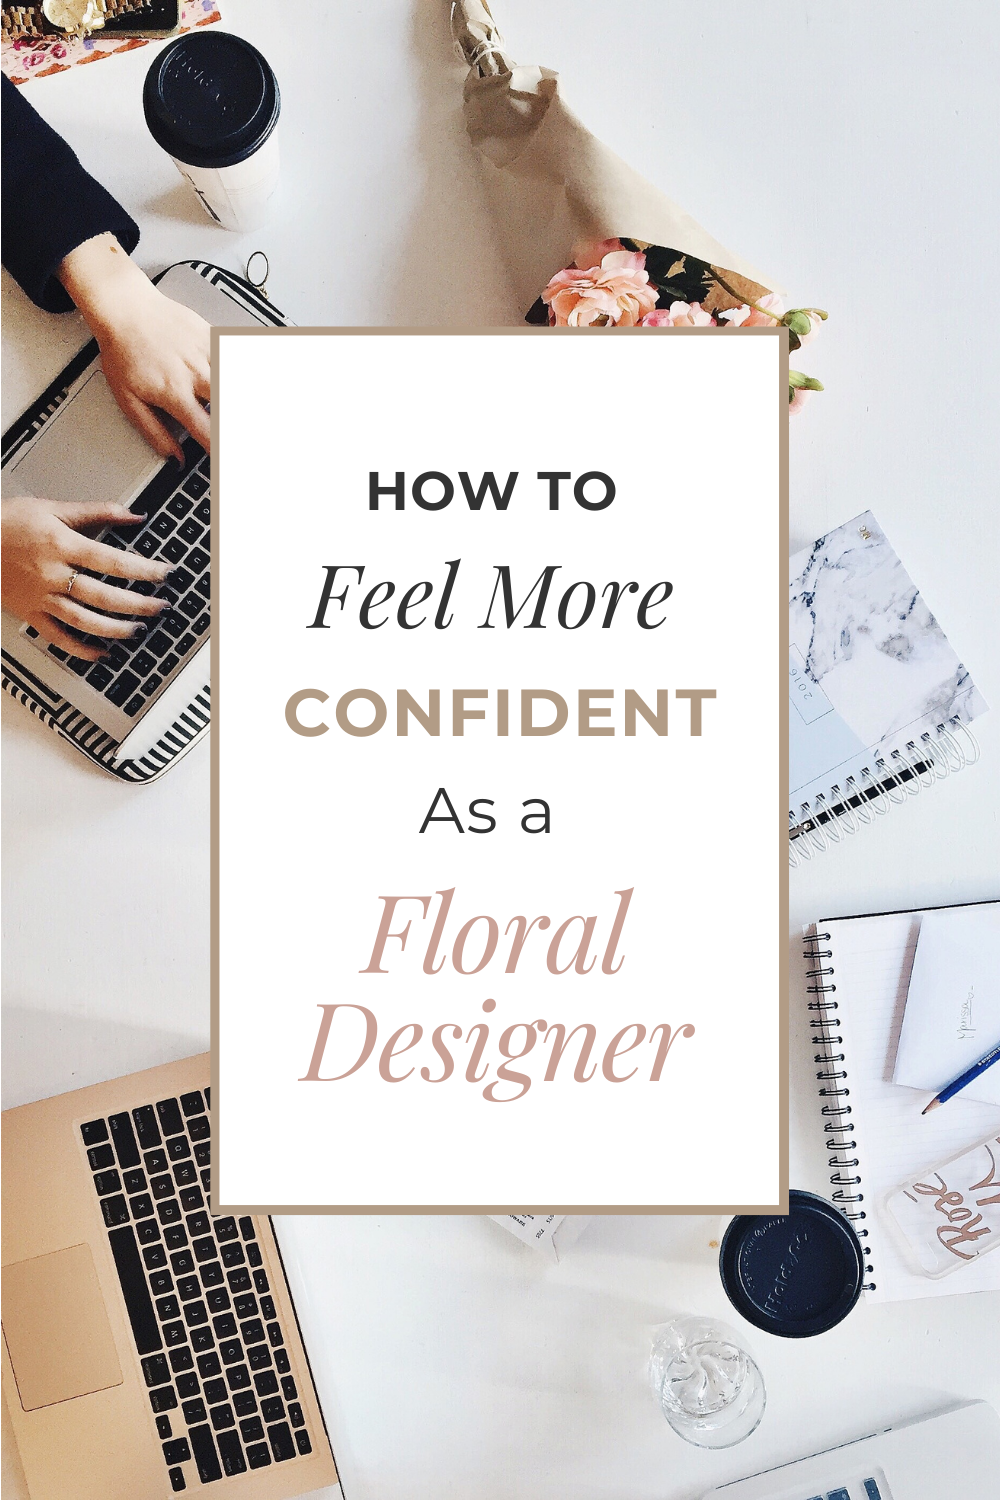 How to Feel More Confident as a Floral Designer